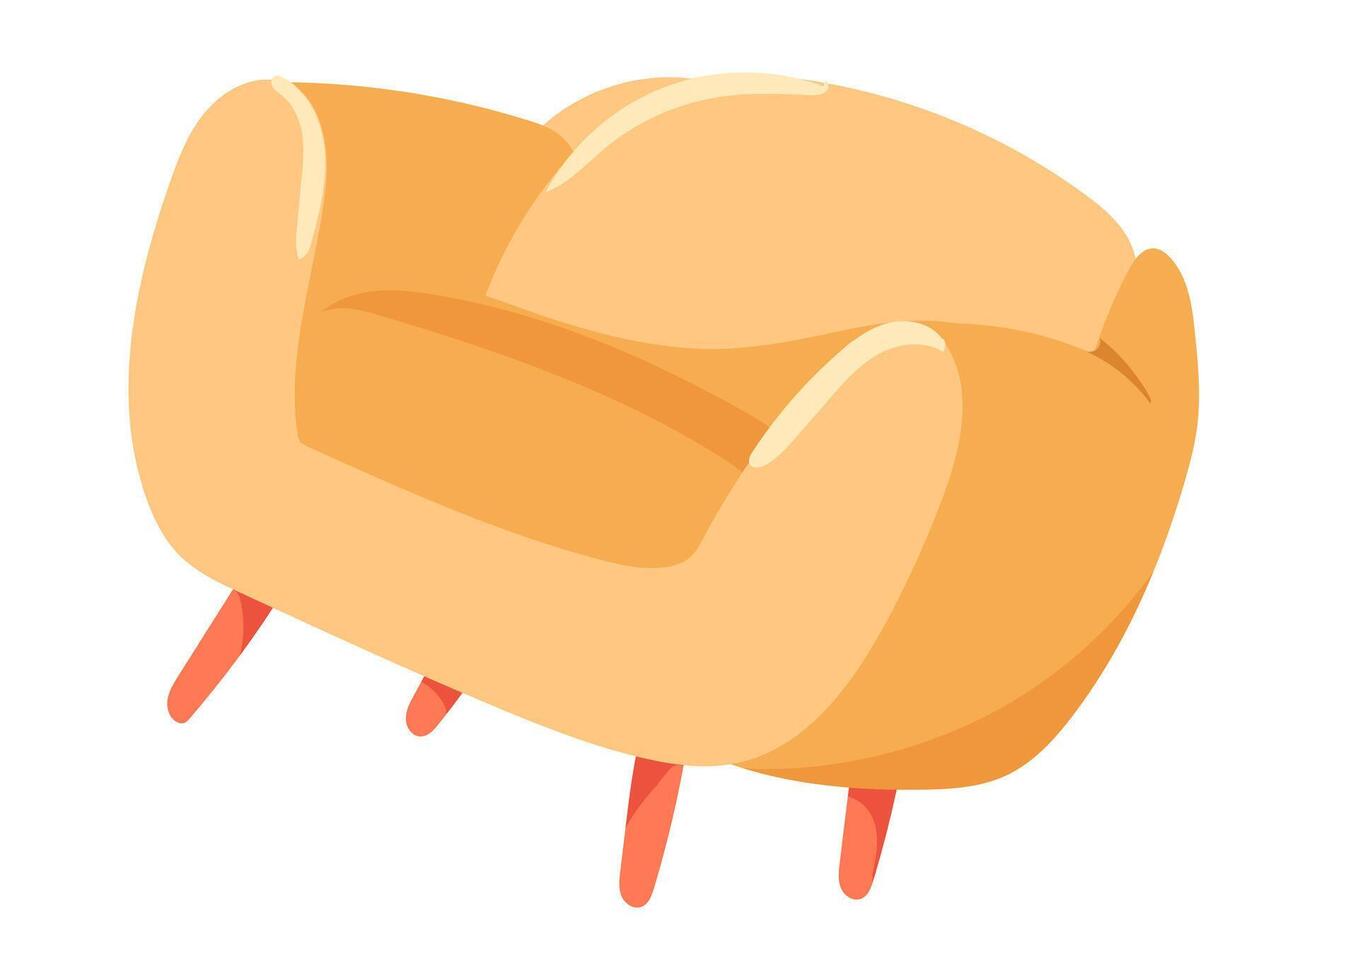 Cozy armchair in flat design. Comfortable couch for home or office interior. illustration isolated. vector